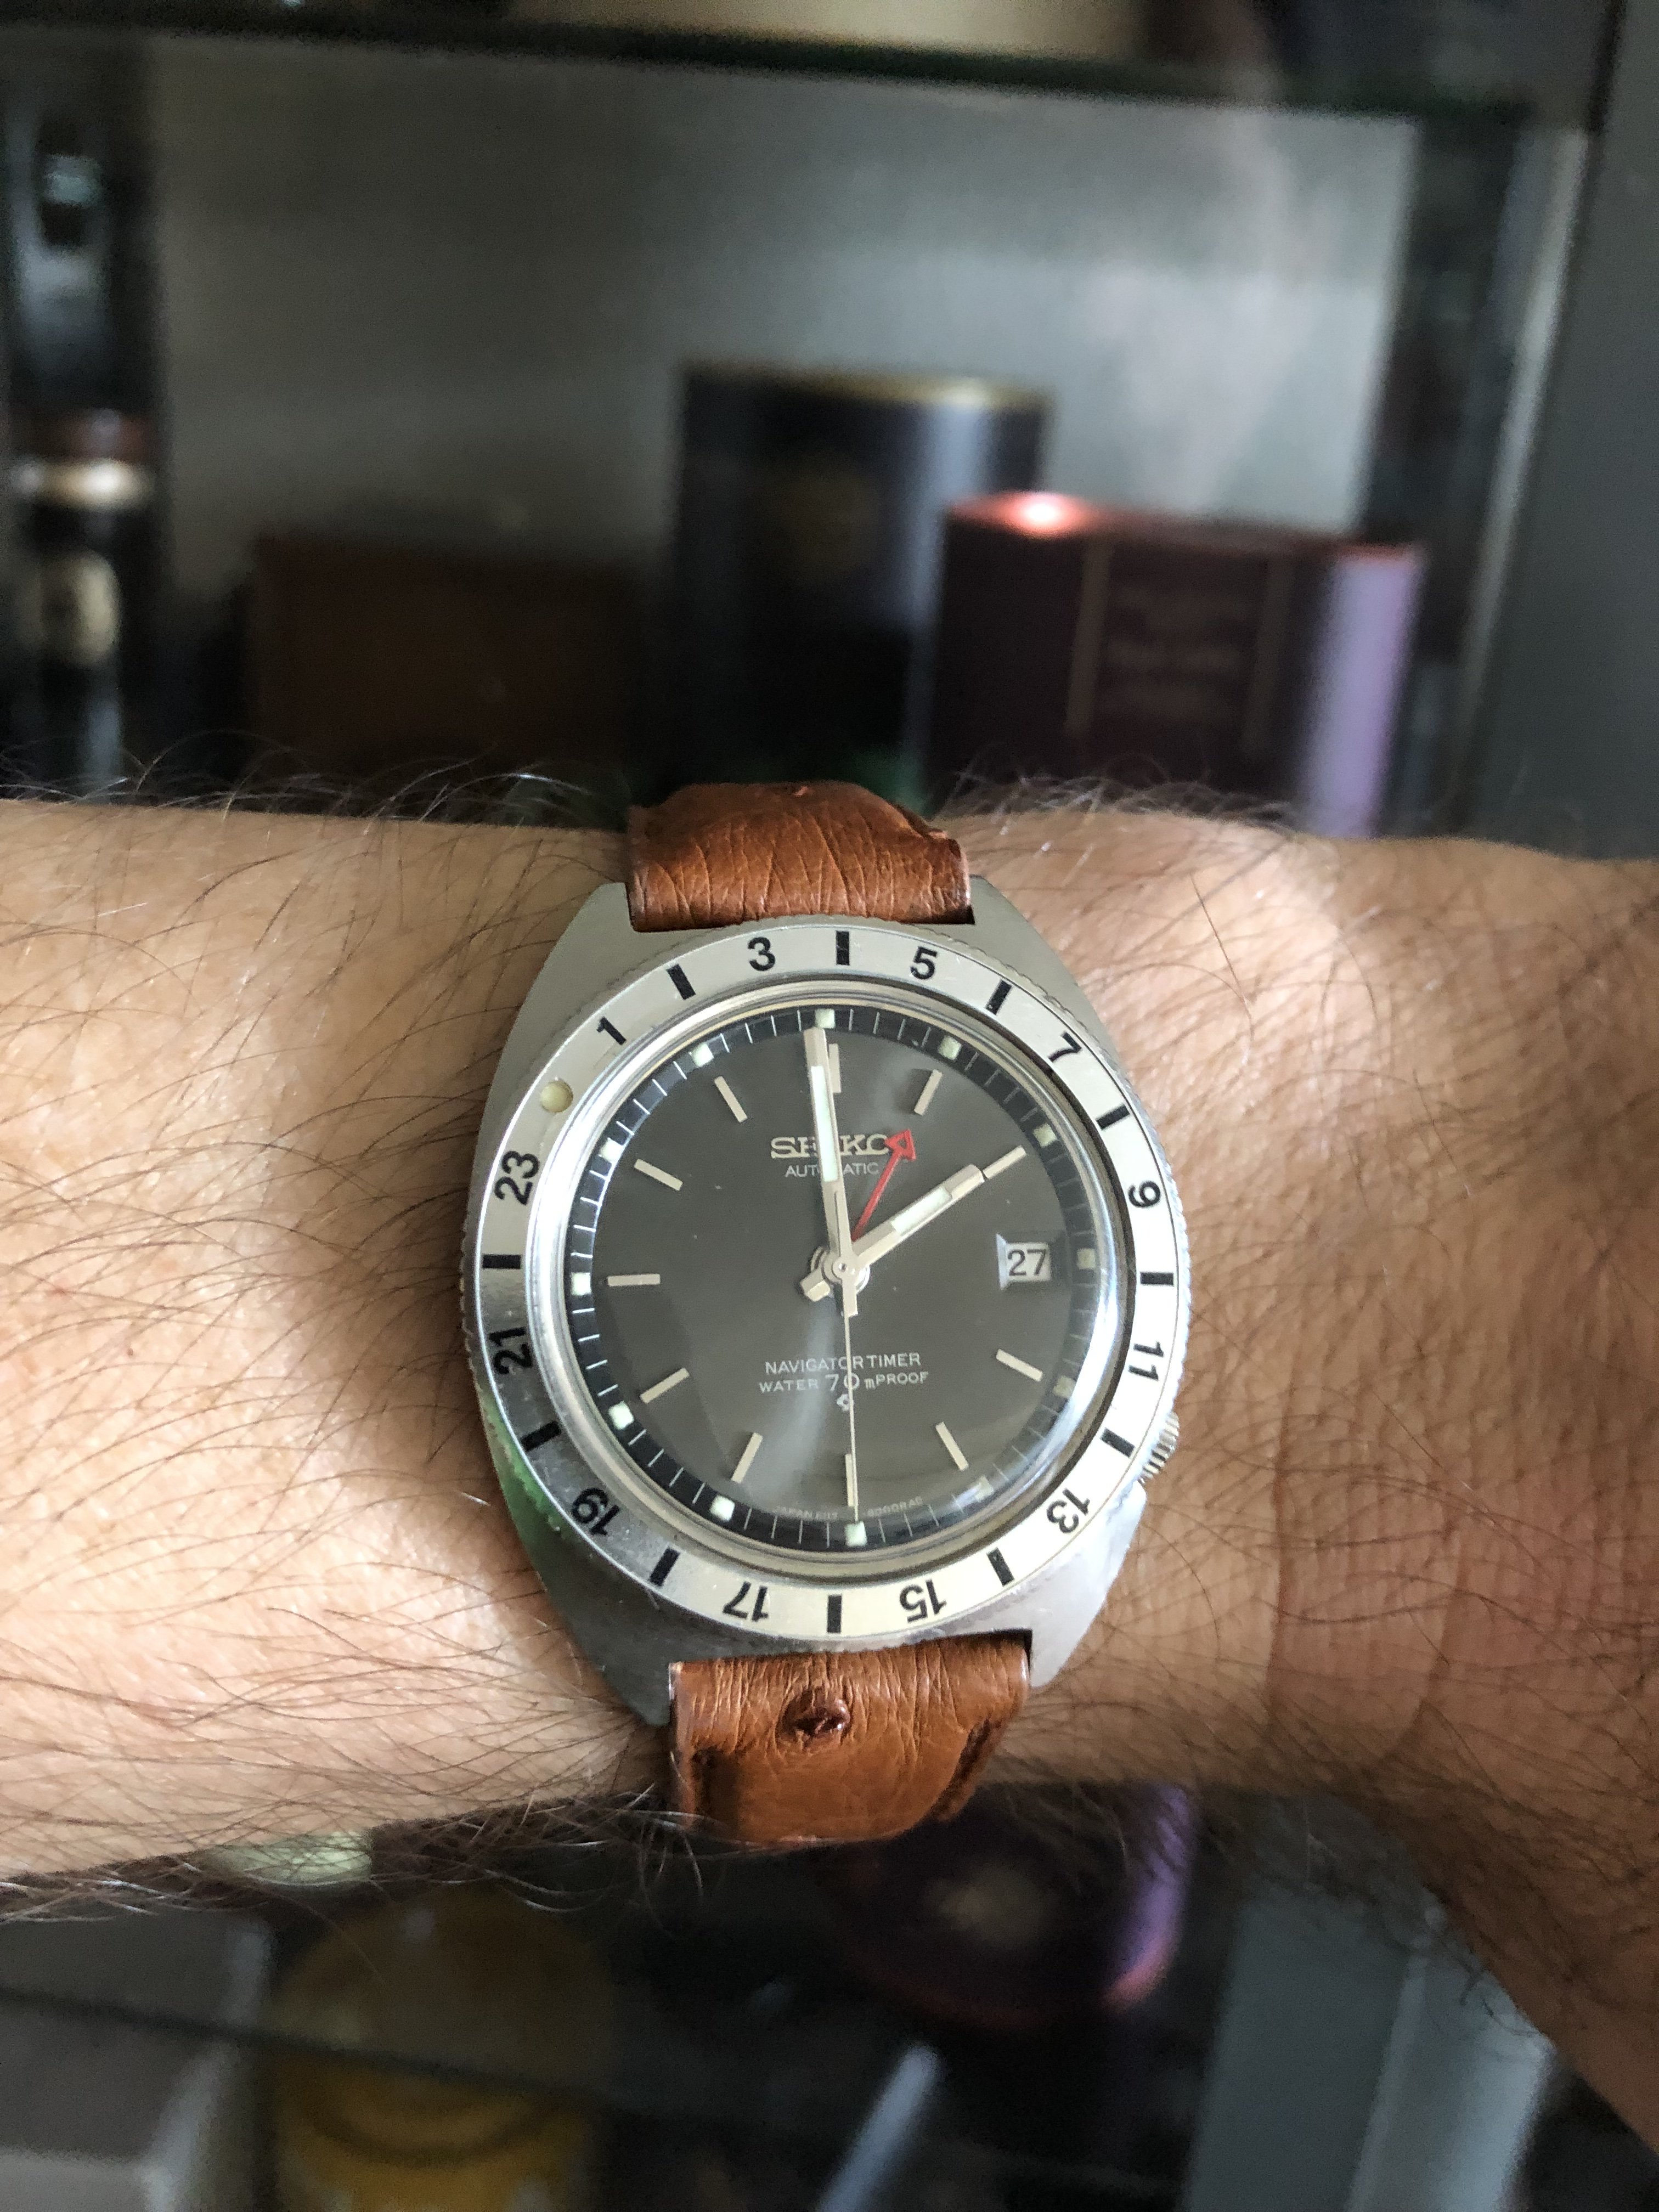 What do you think about this Seiko 6117-6410? | Omega Forums